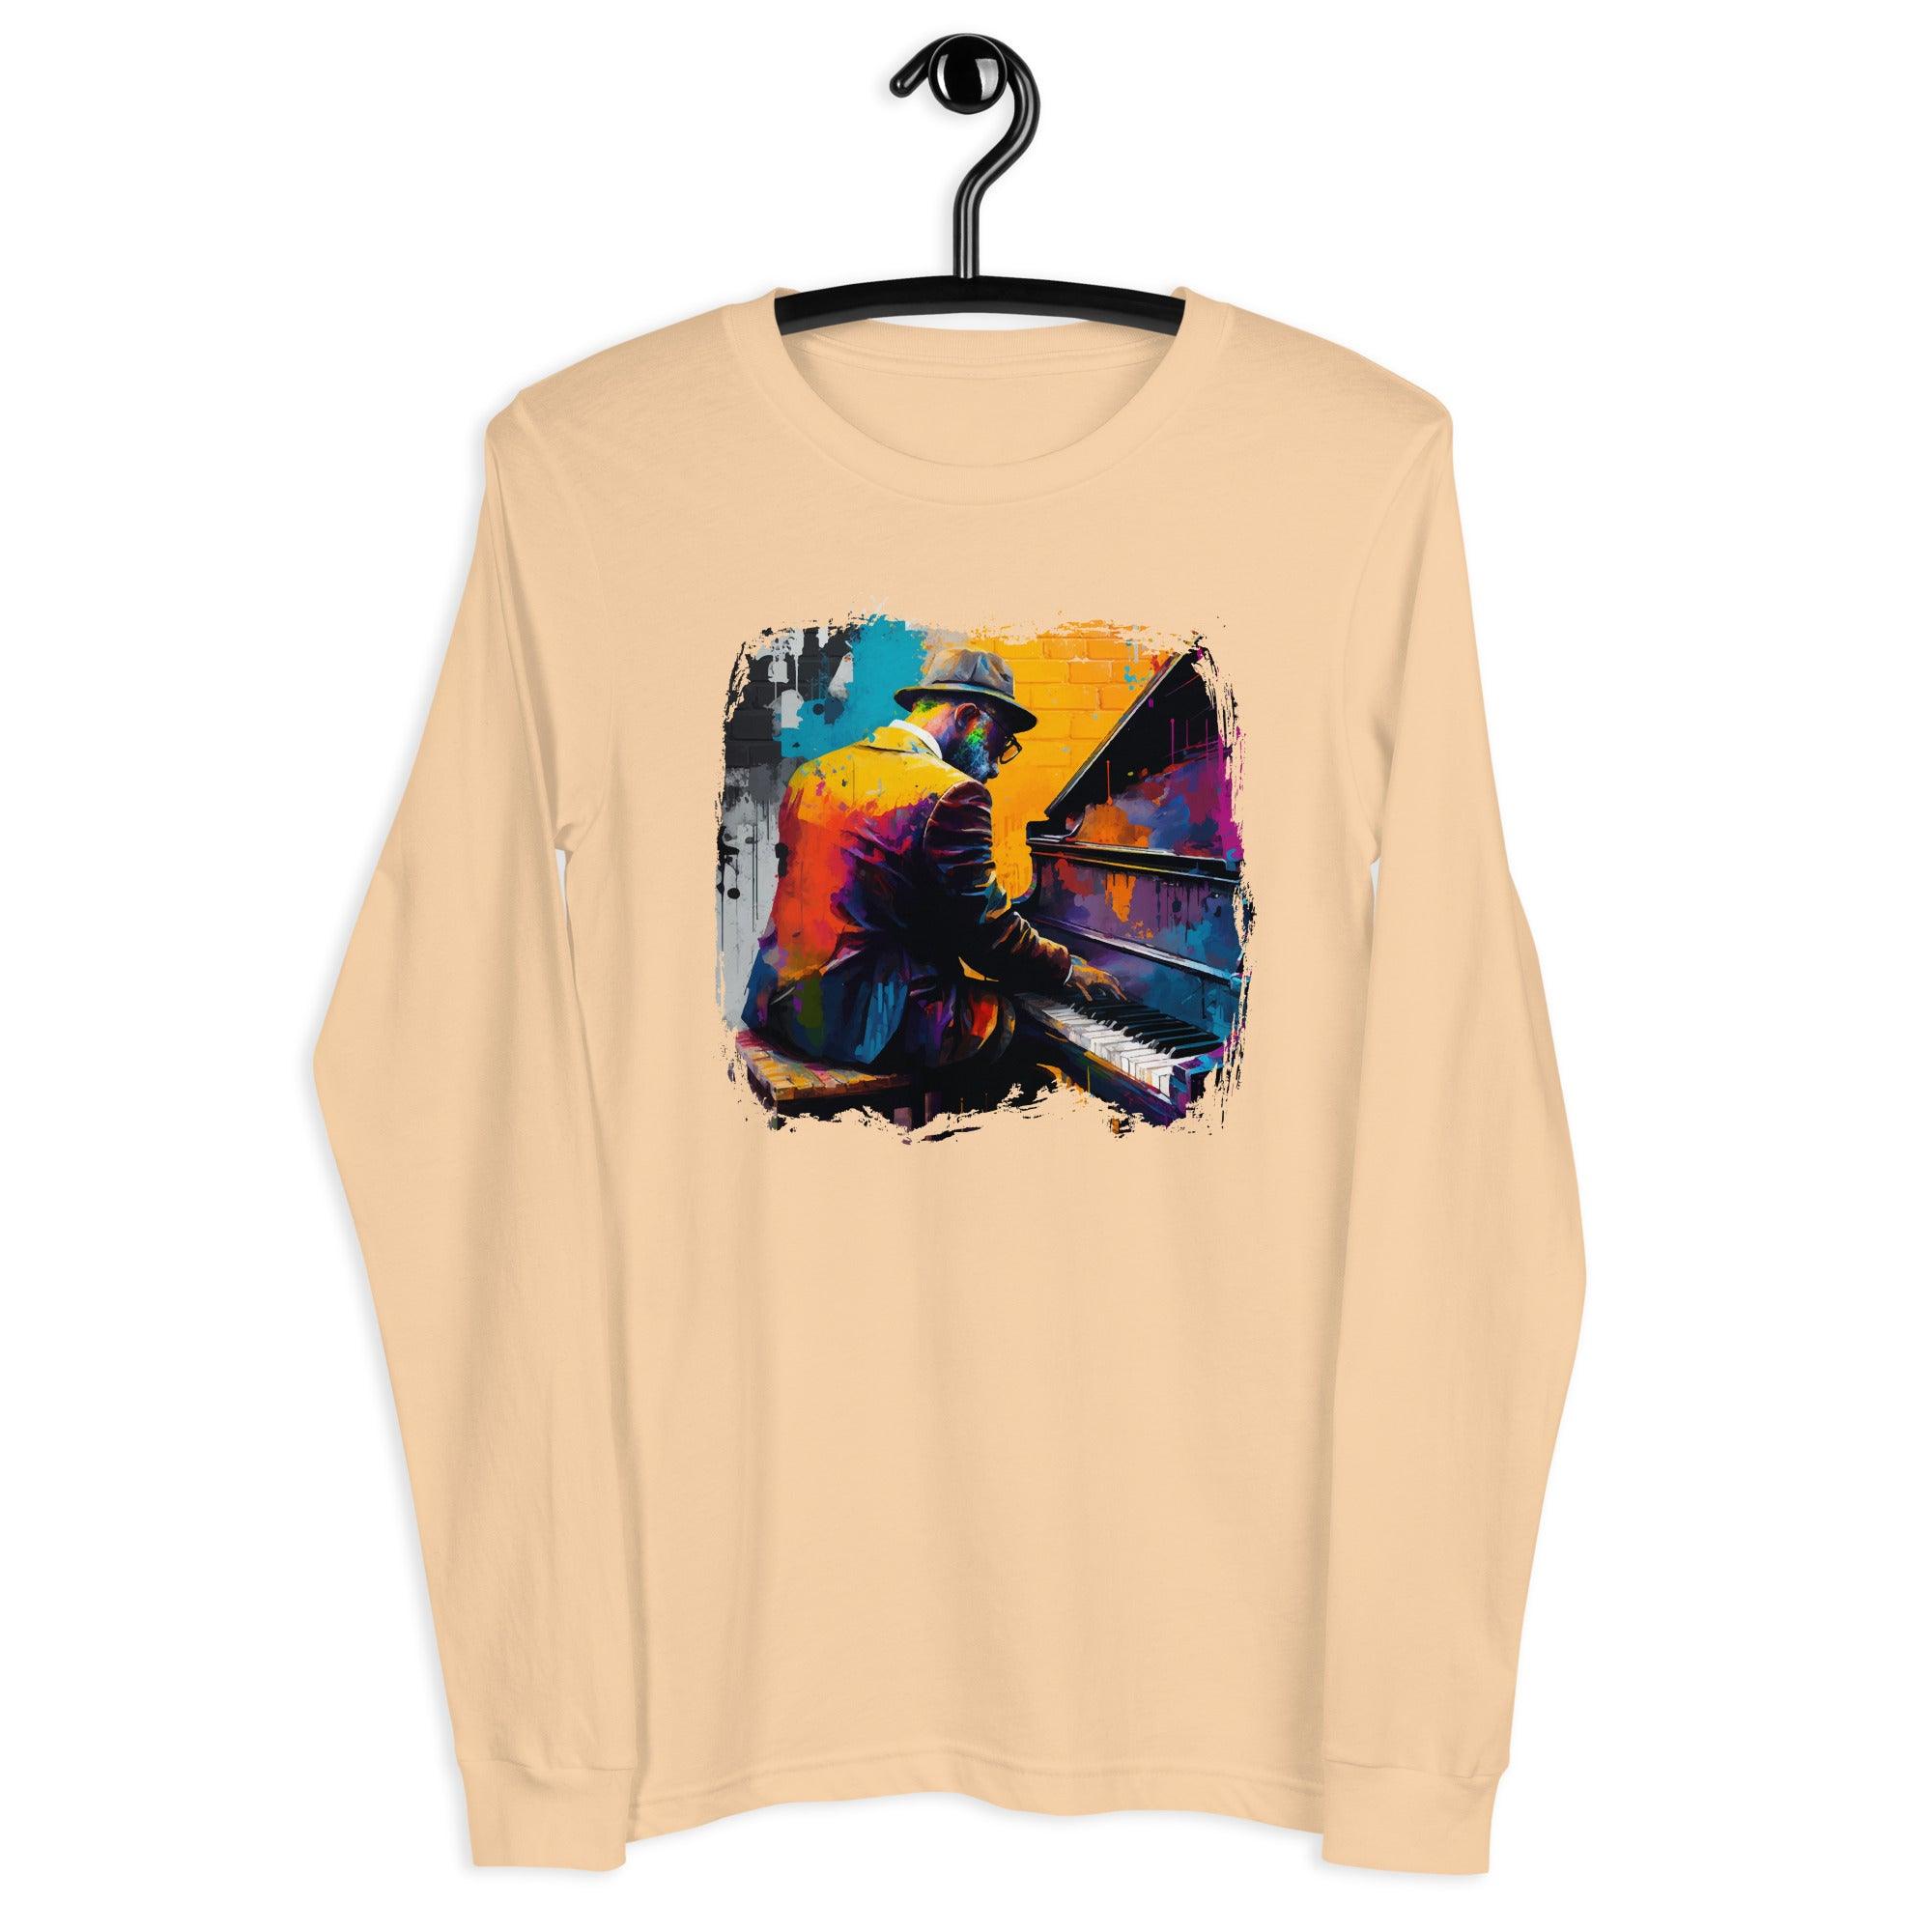 Noodling On The Keyboard Unisex Long Sleeve Tee - Beyond T-shirts